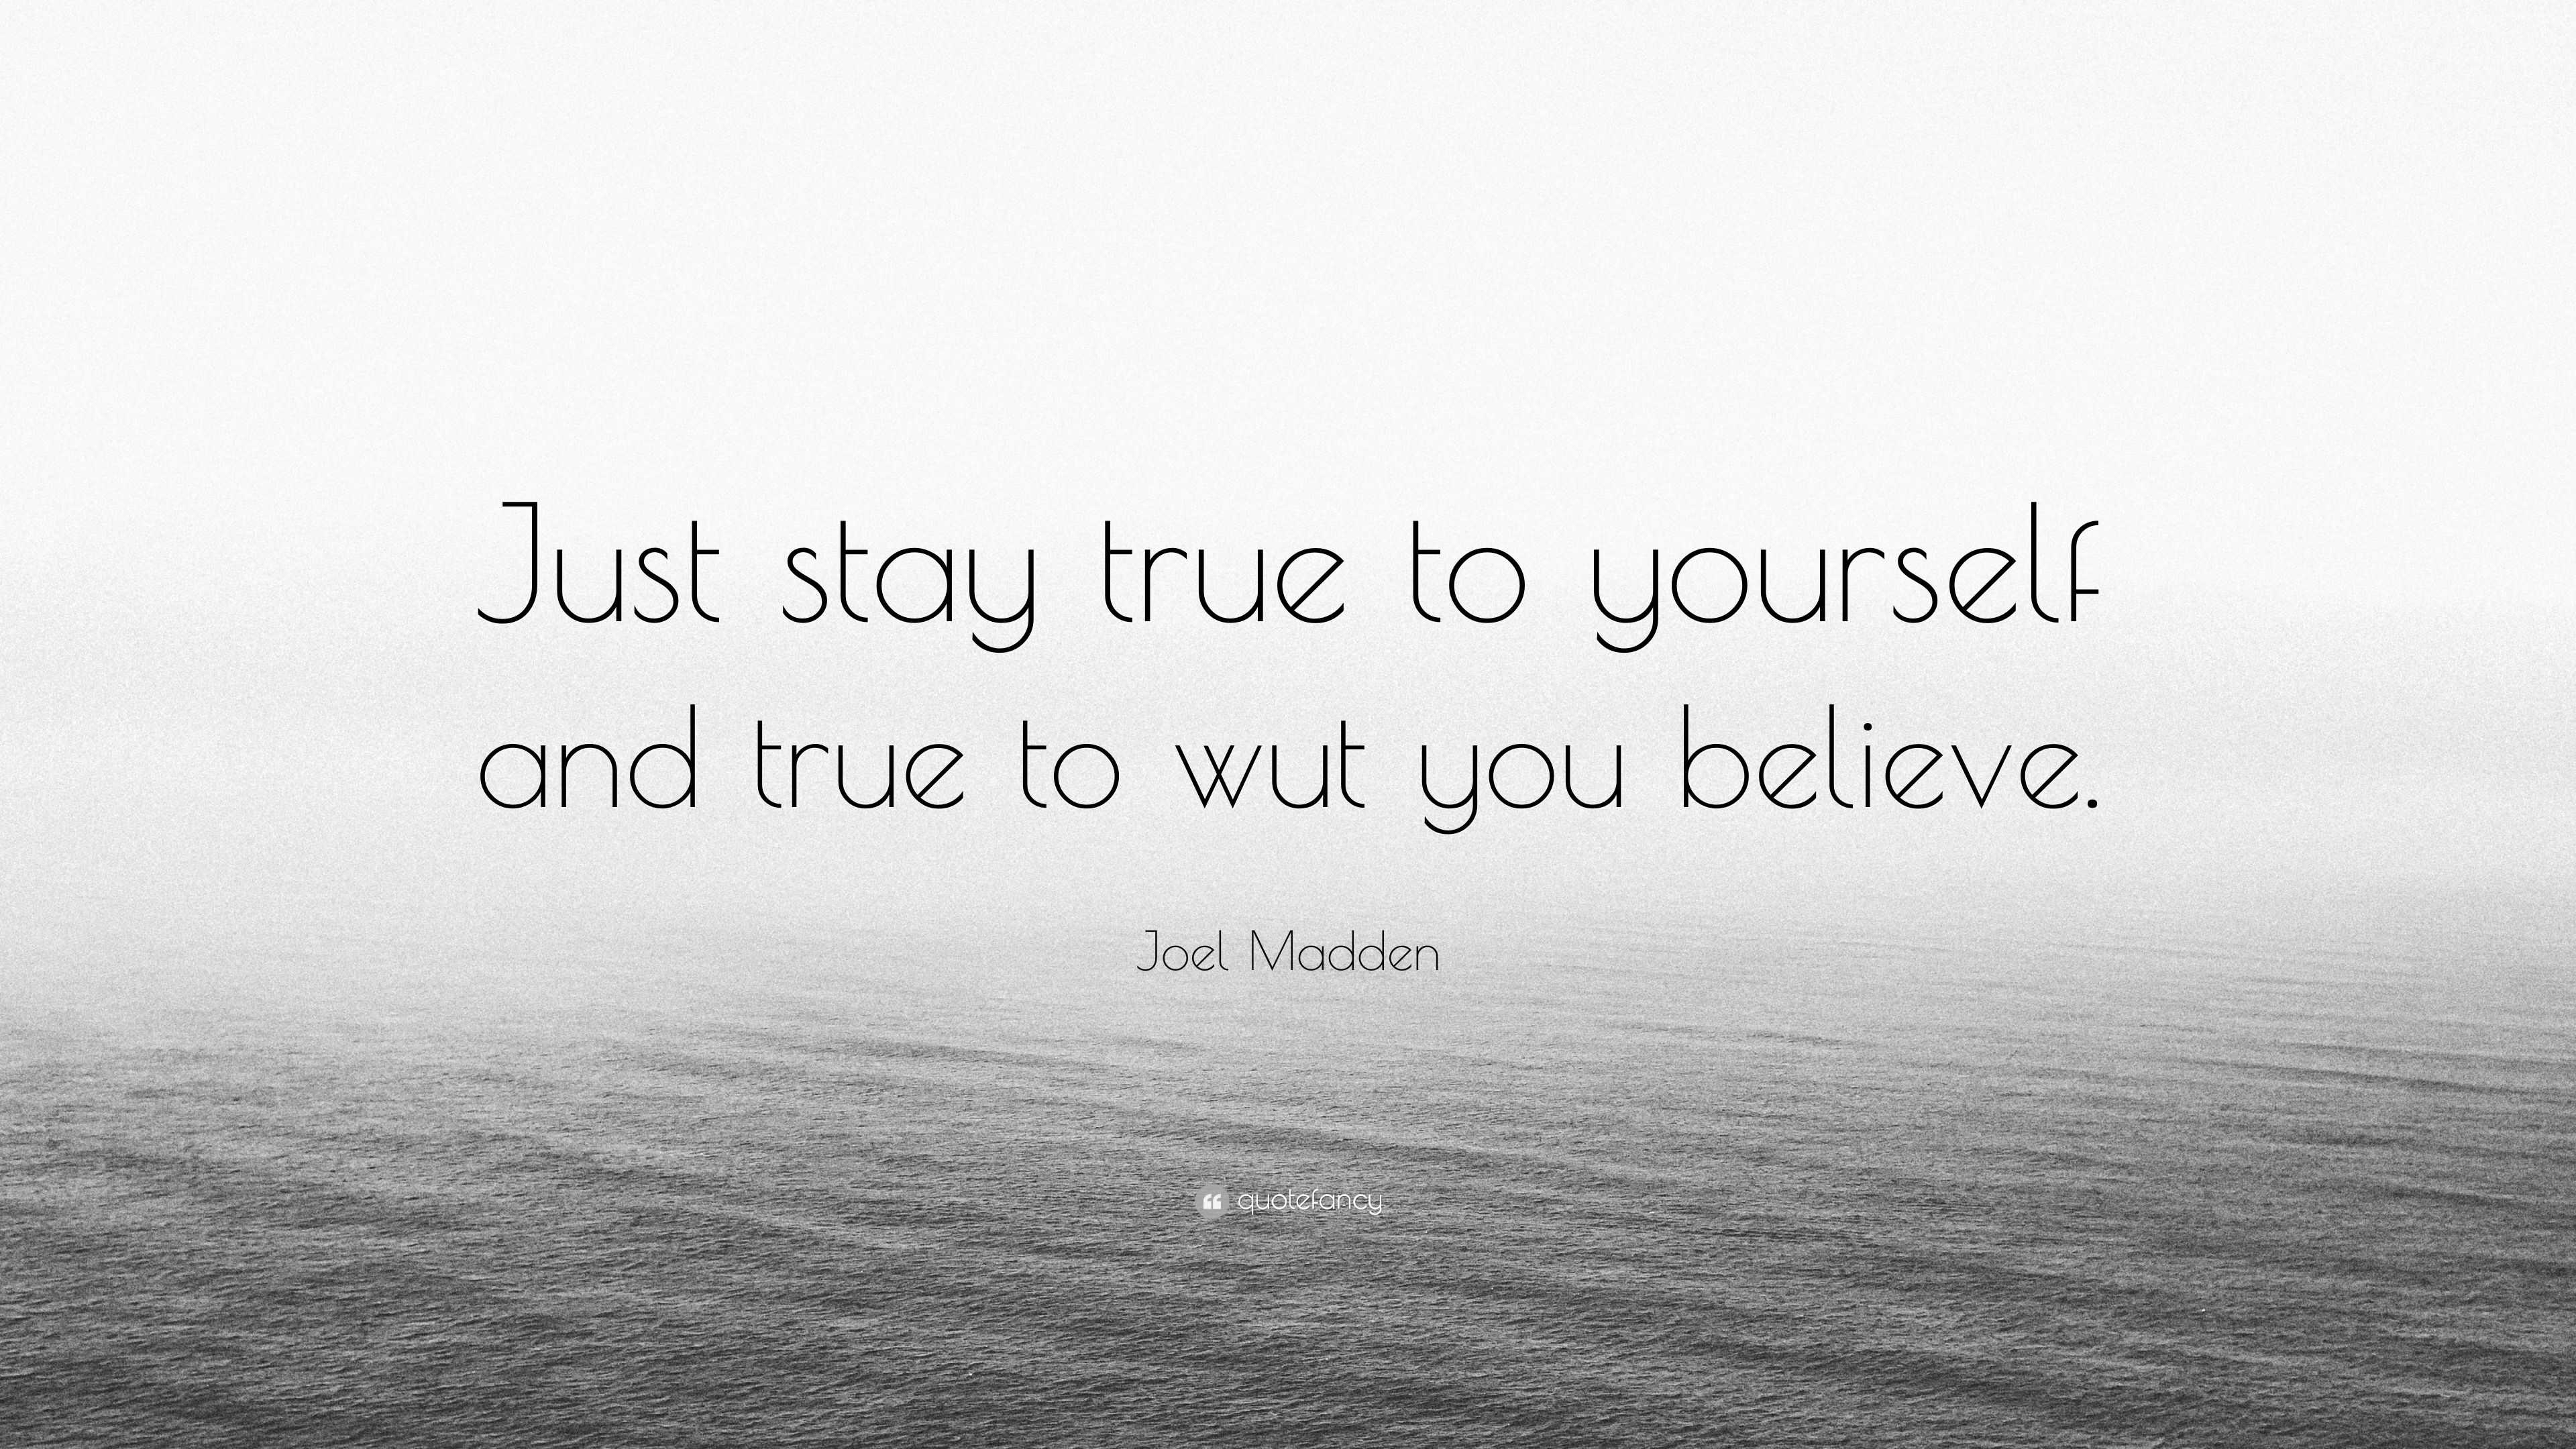 Joel Madden Quote: “Just Stay True To Yourself And True To Wut You Believe.”